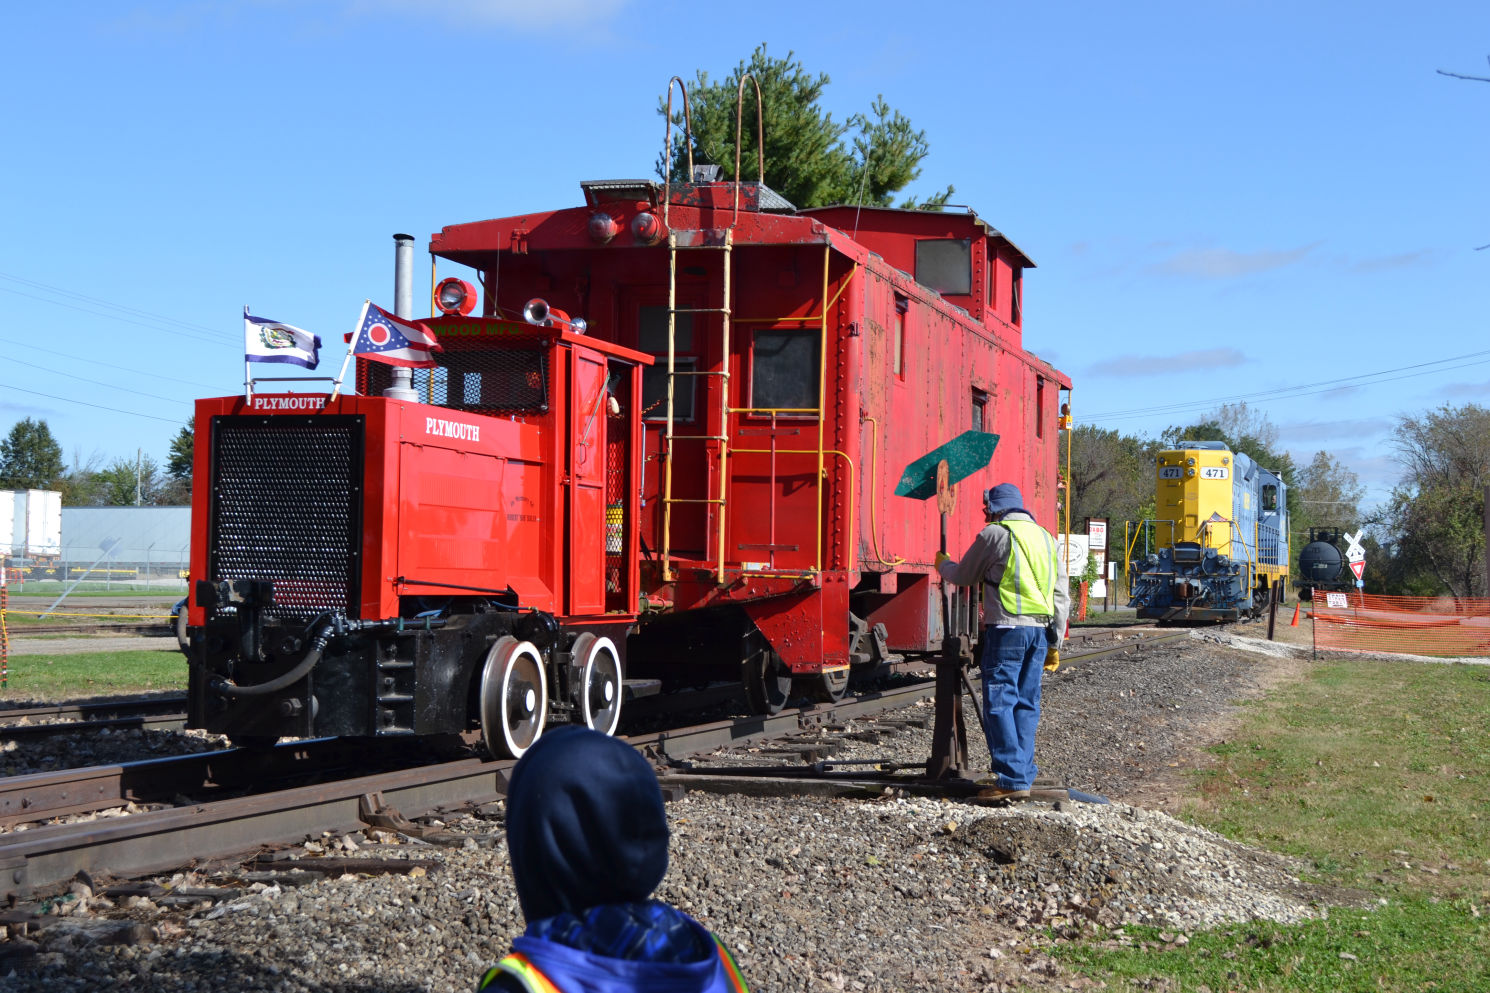 The Little Red Engine and cabboose #330